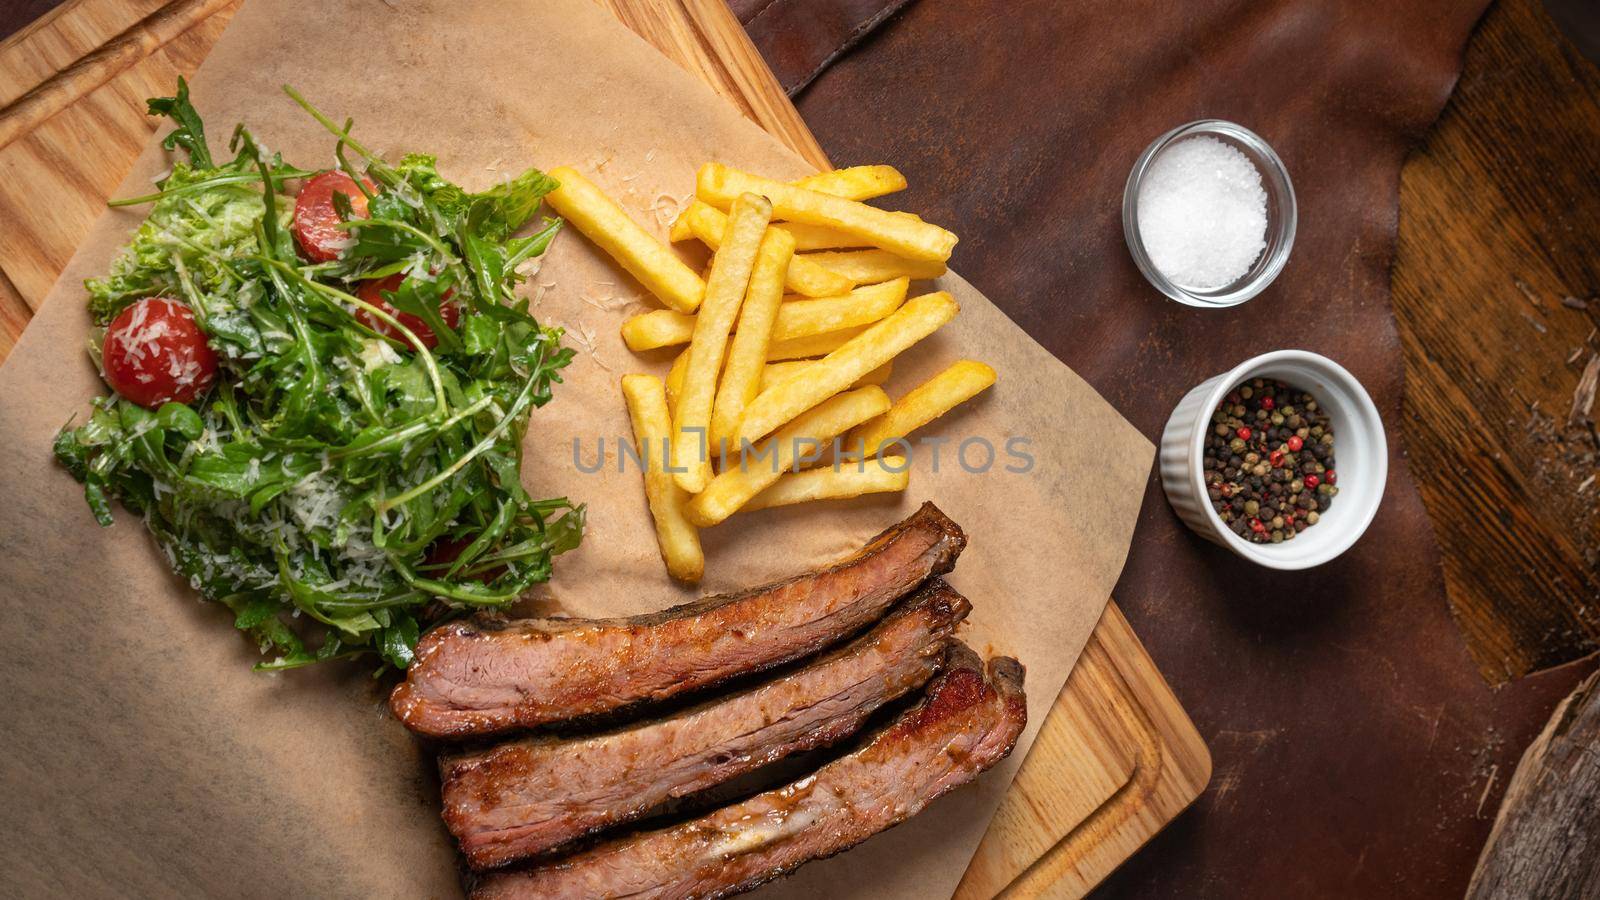 Beef rib with French fries and arugula salad with cherry tomatoes and parmesan cheese served on board covered with food grade paper. Restaurant concept by LipikStockMedia